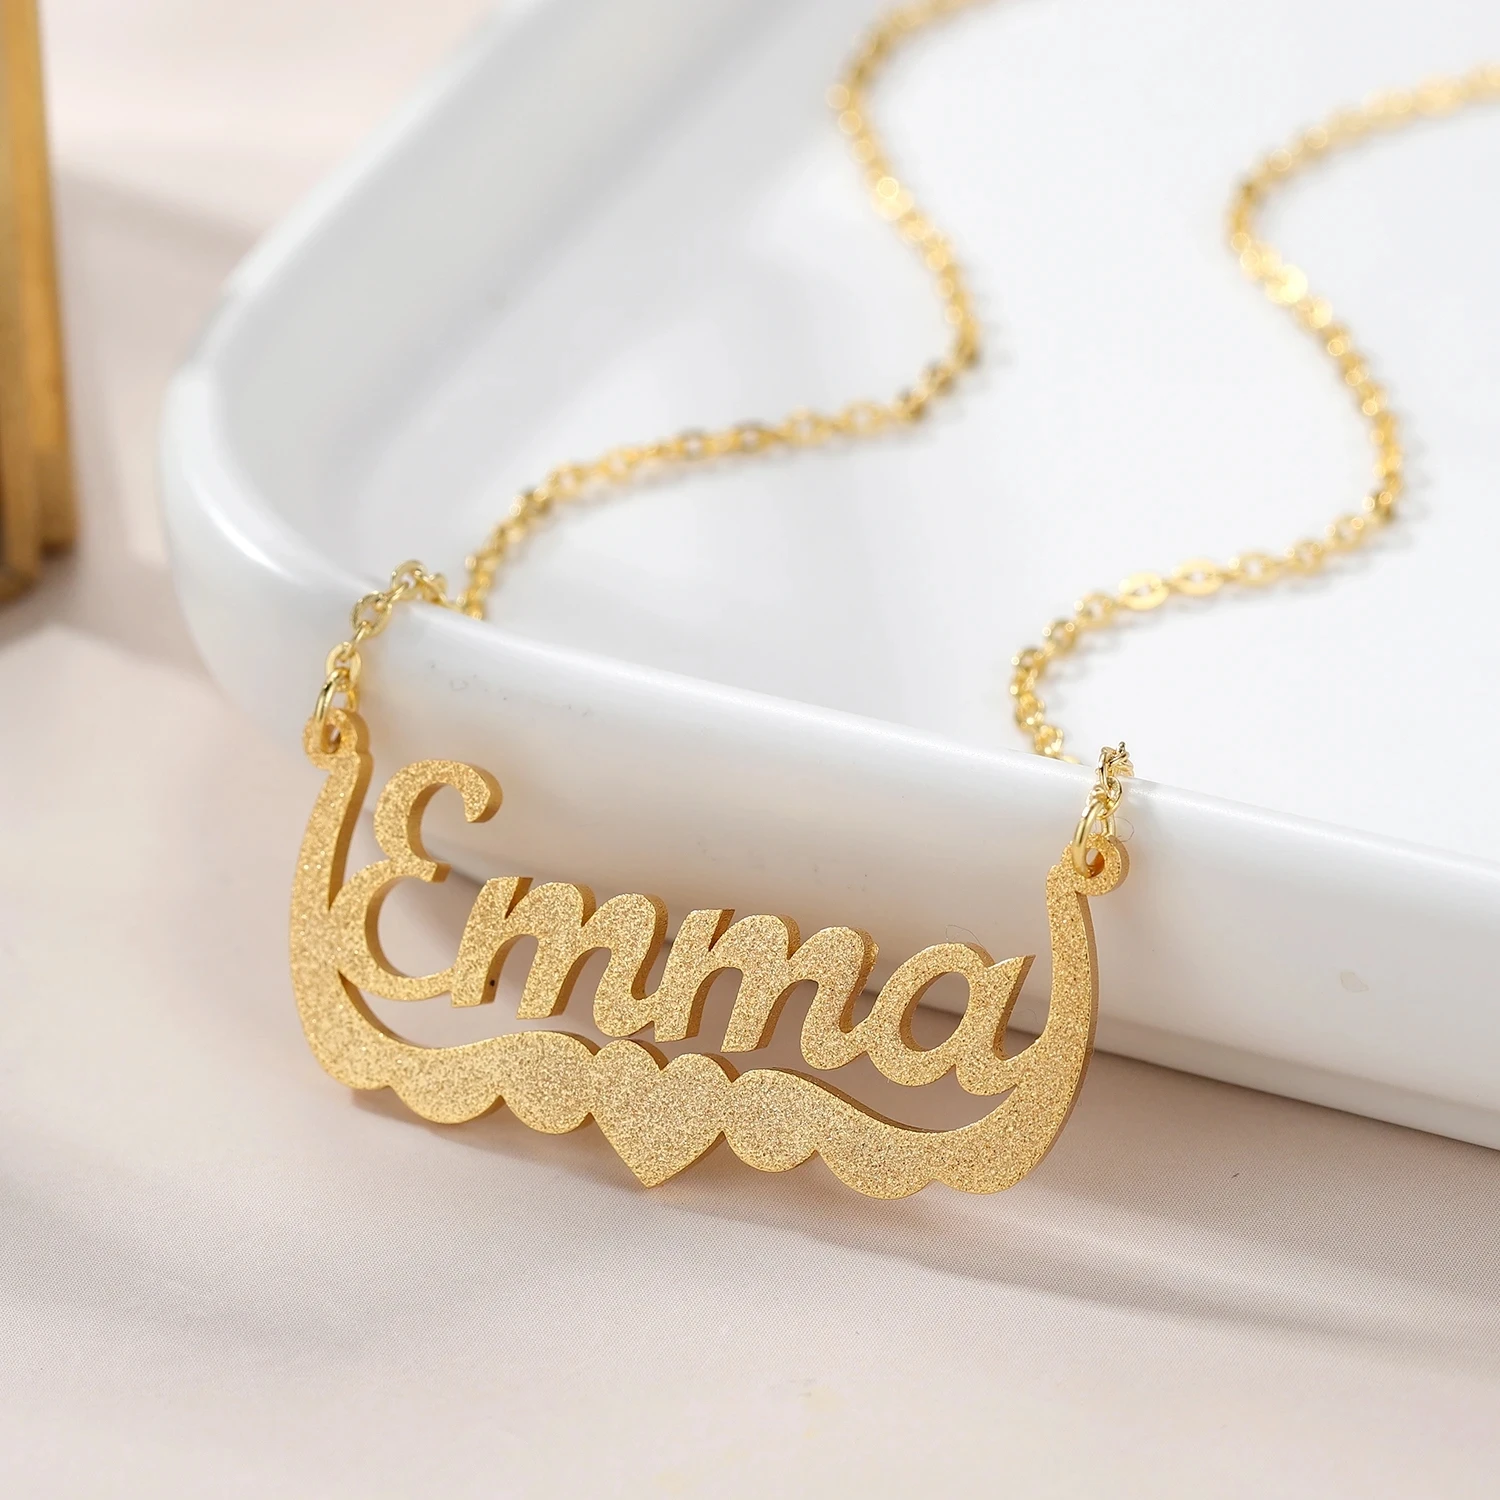 Custom Frosted Necklace With Heart Gilded Name Pendant Personalized Stainless Steel Nameplate Necklaces For Women Jewelry Gifts